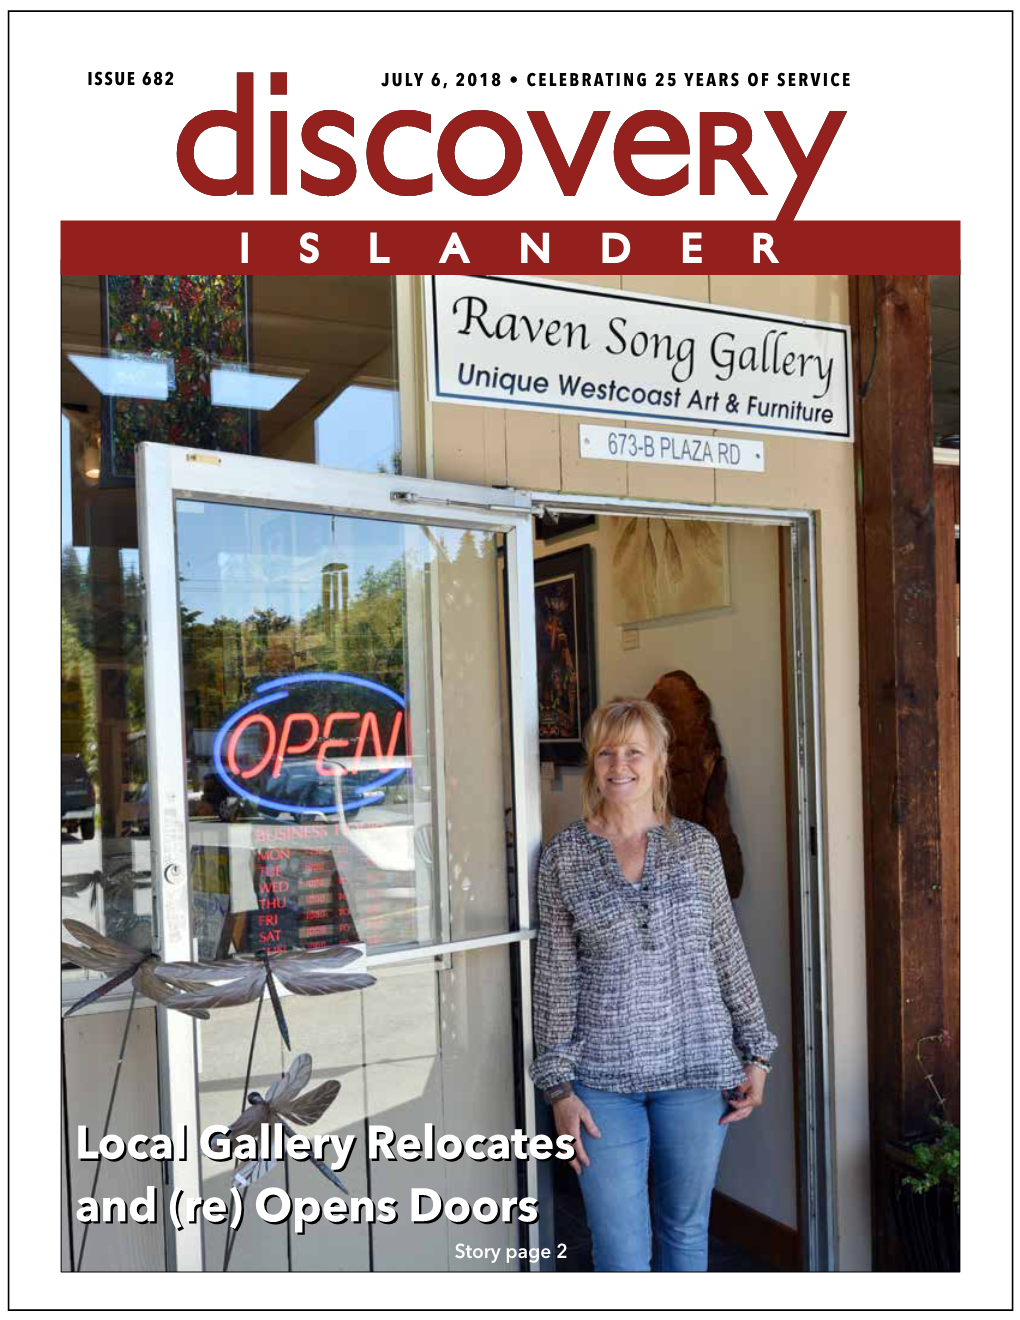 Opens Doors Local Gallery Relocates and (Re)